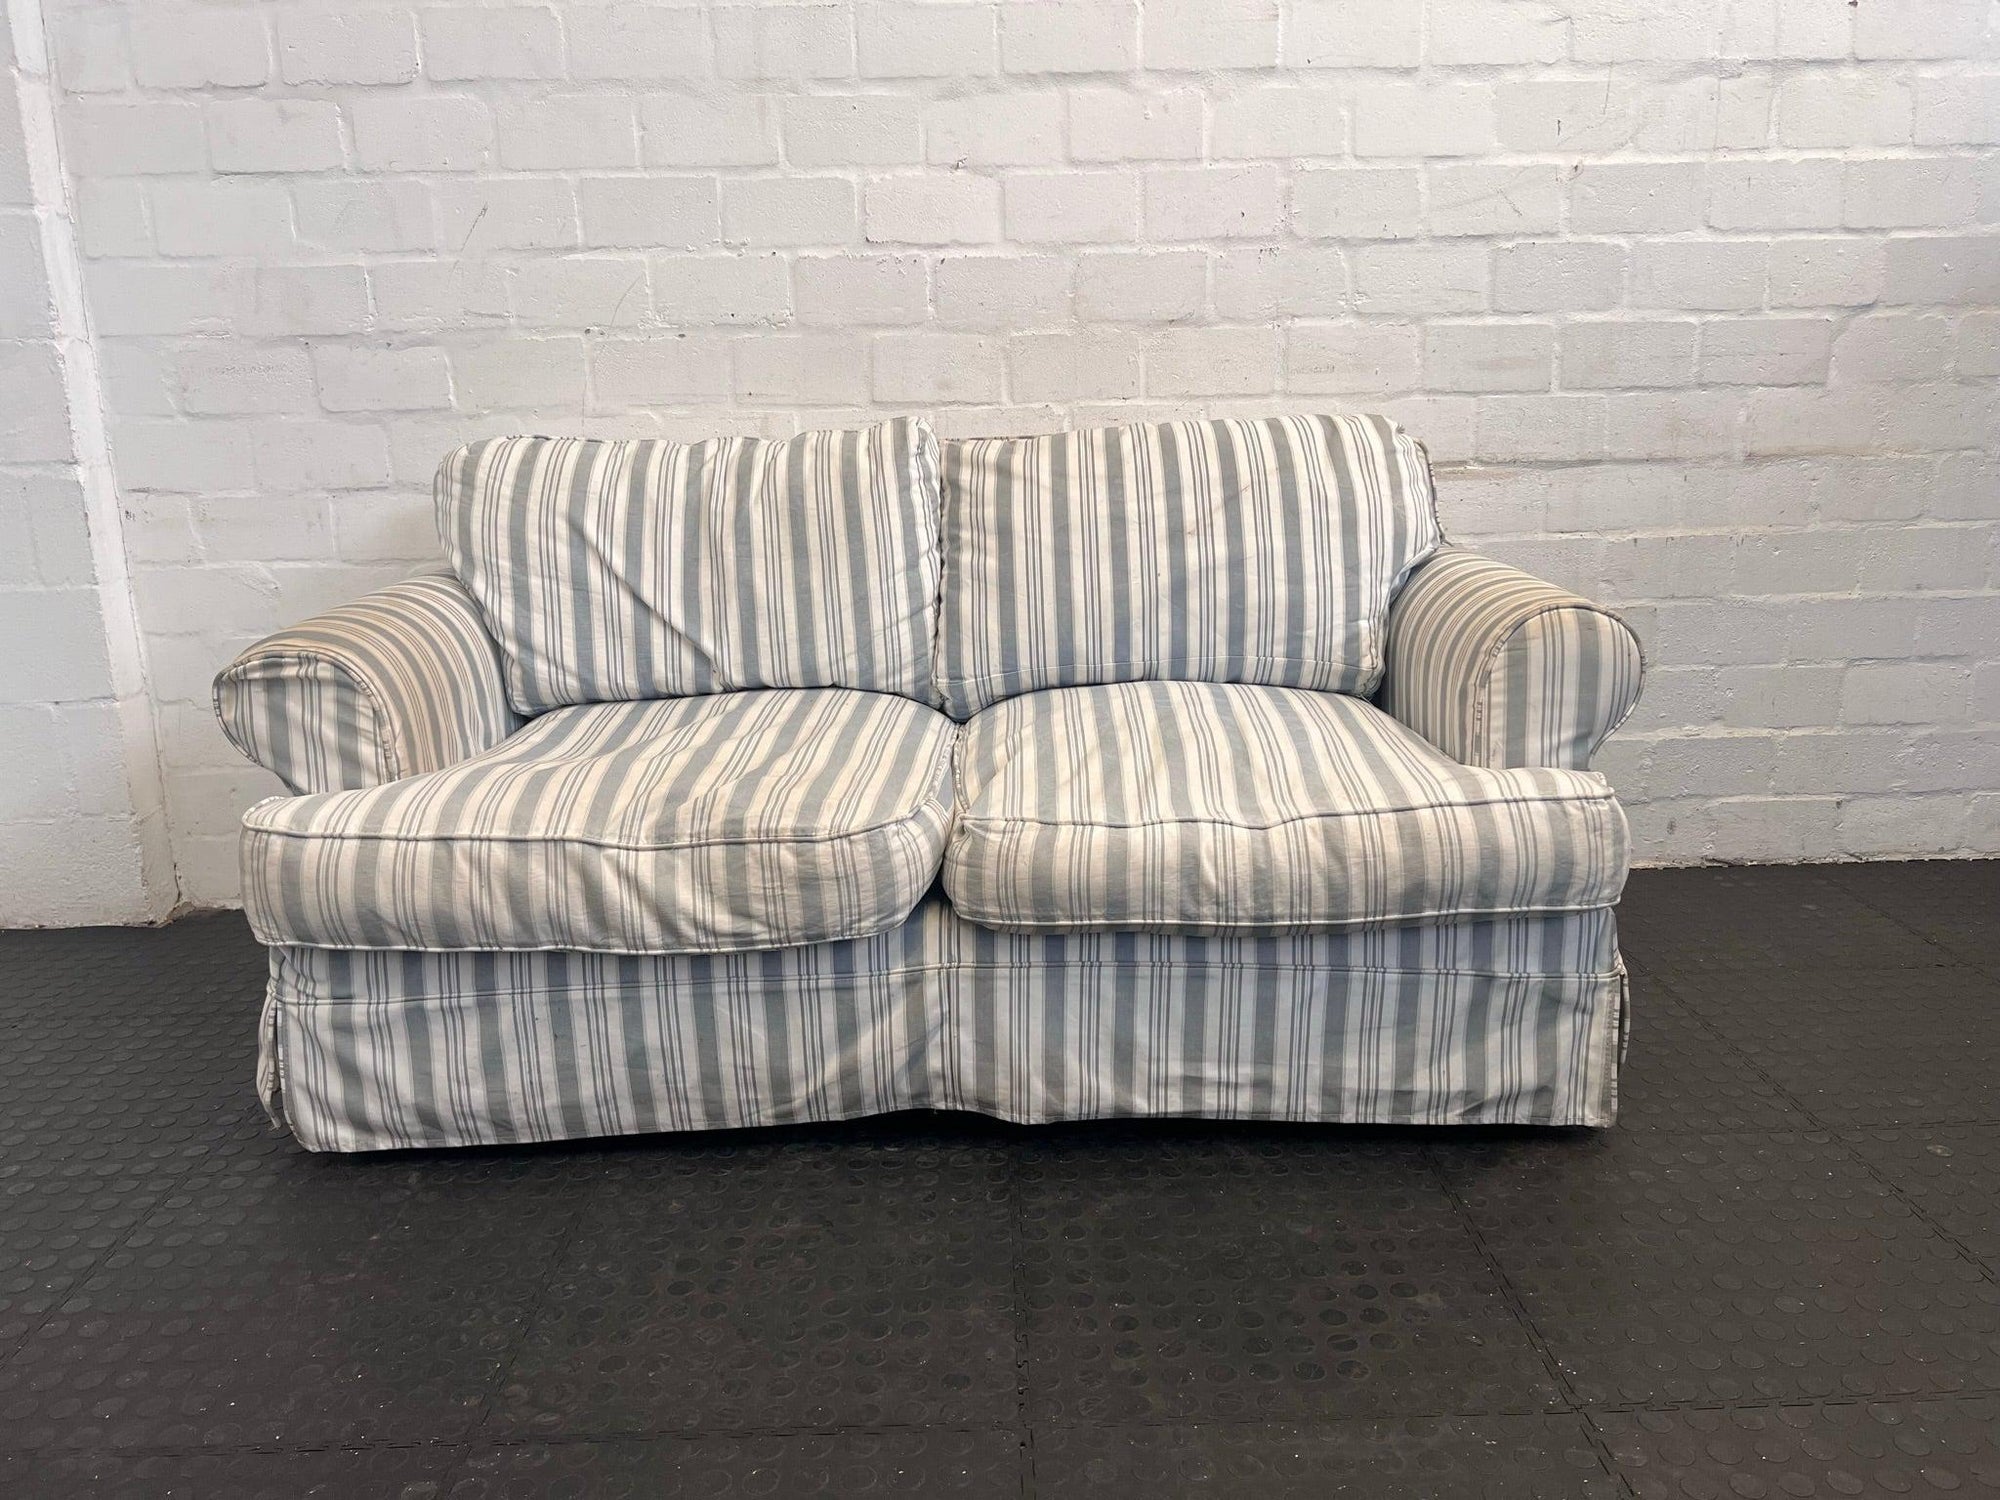 Grey and White Striped Fabric 2 Seater Couch - REDUCED